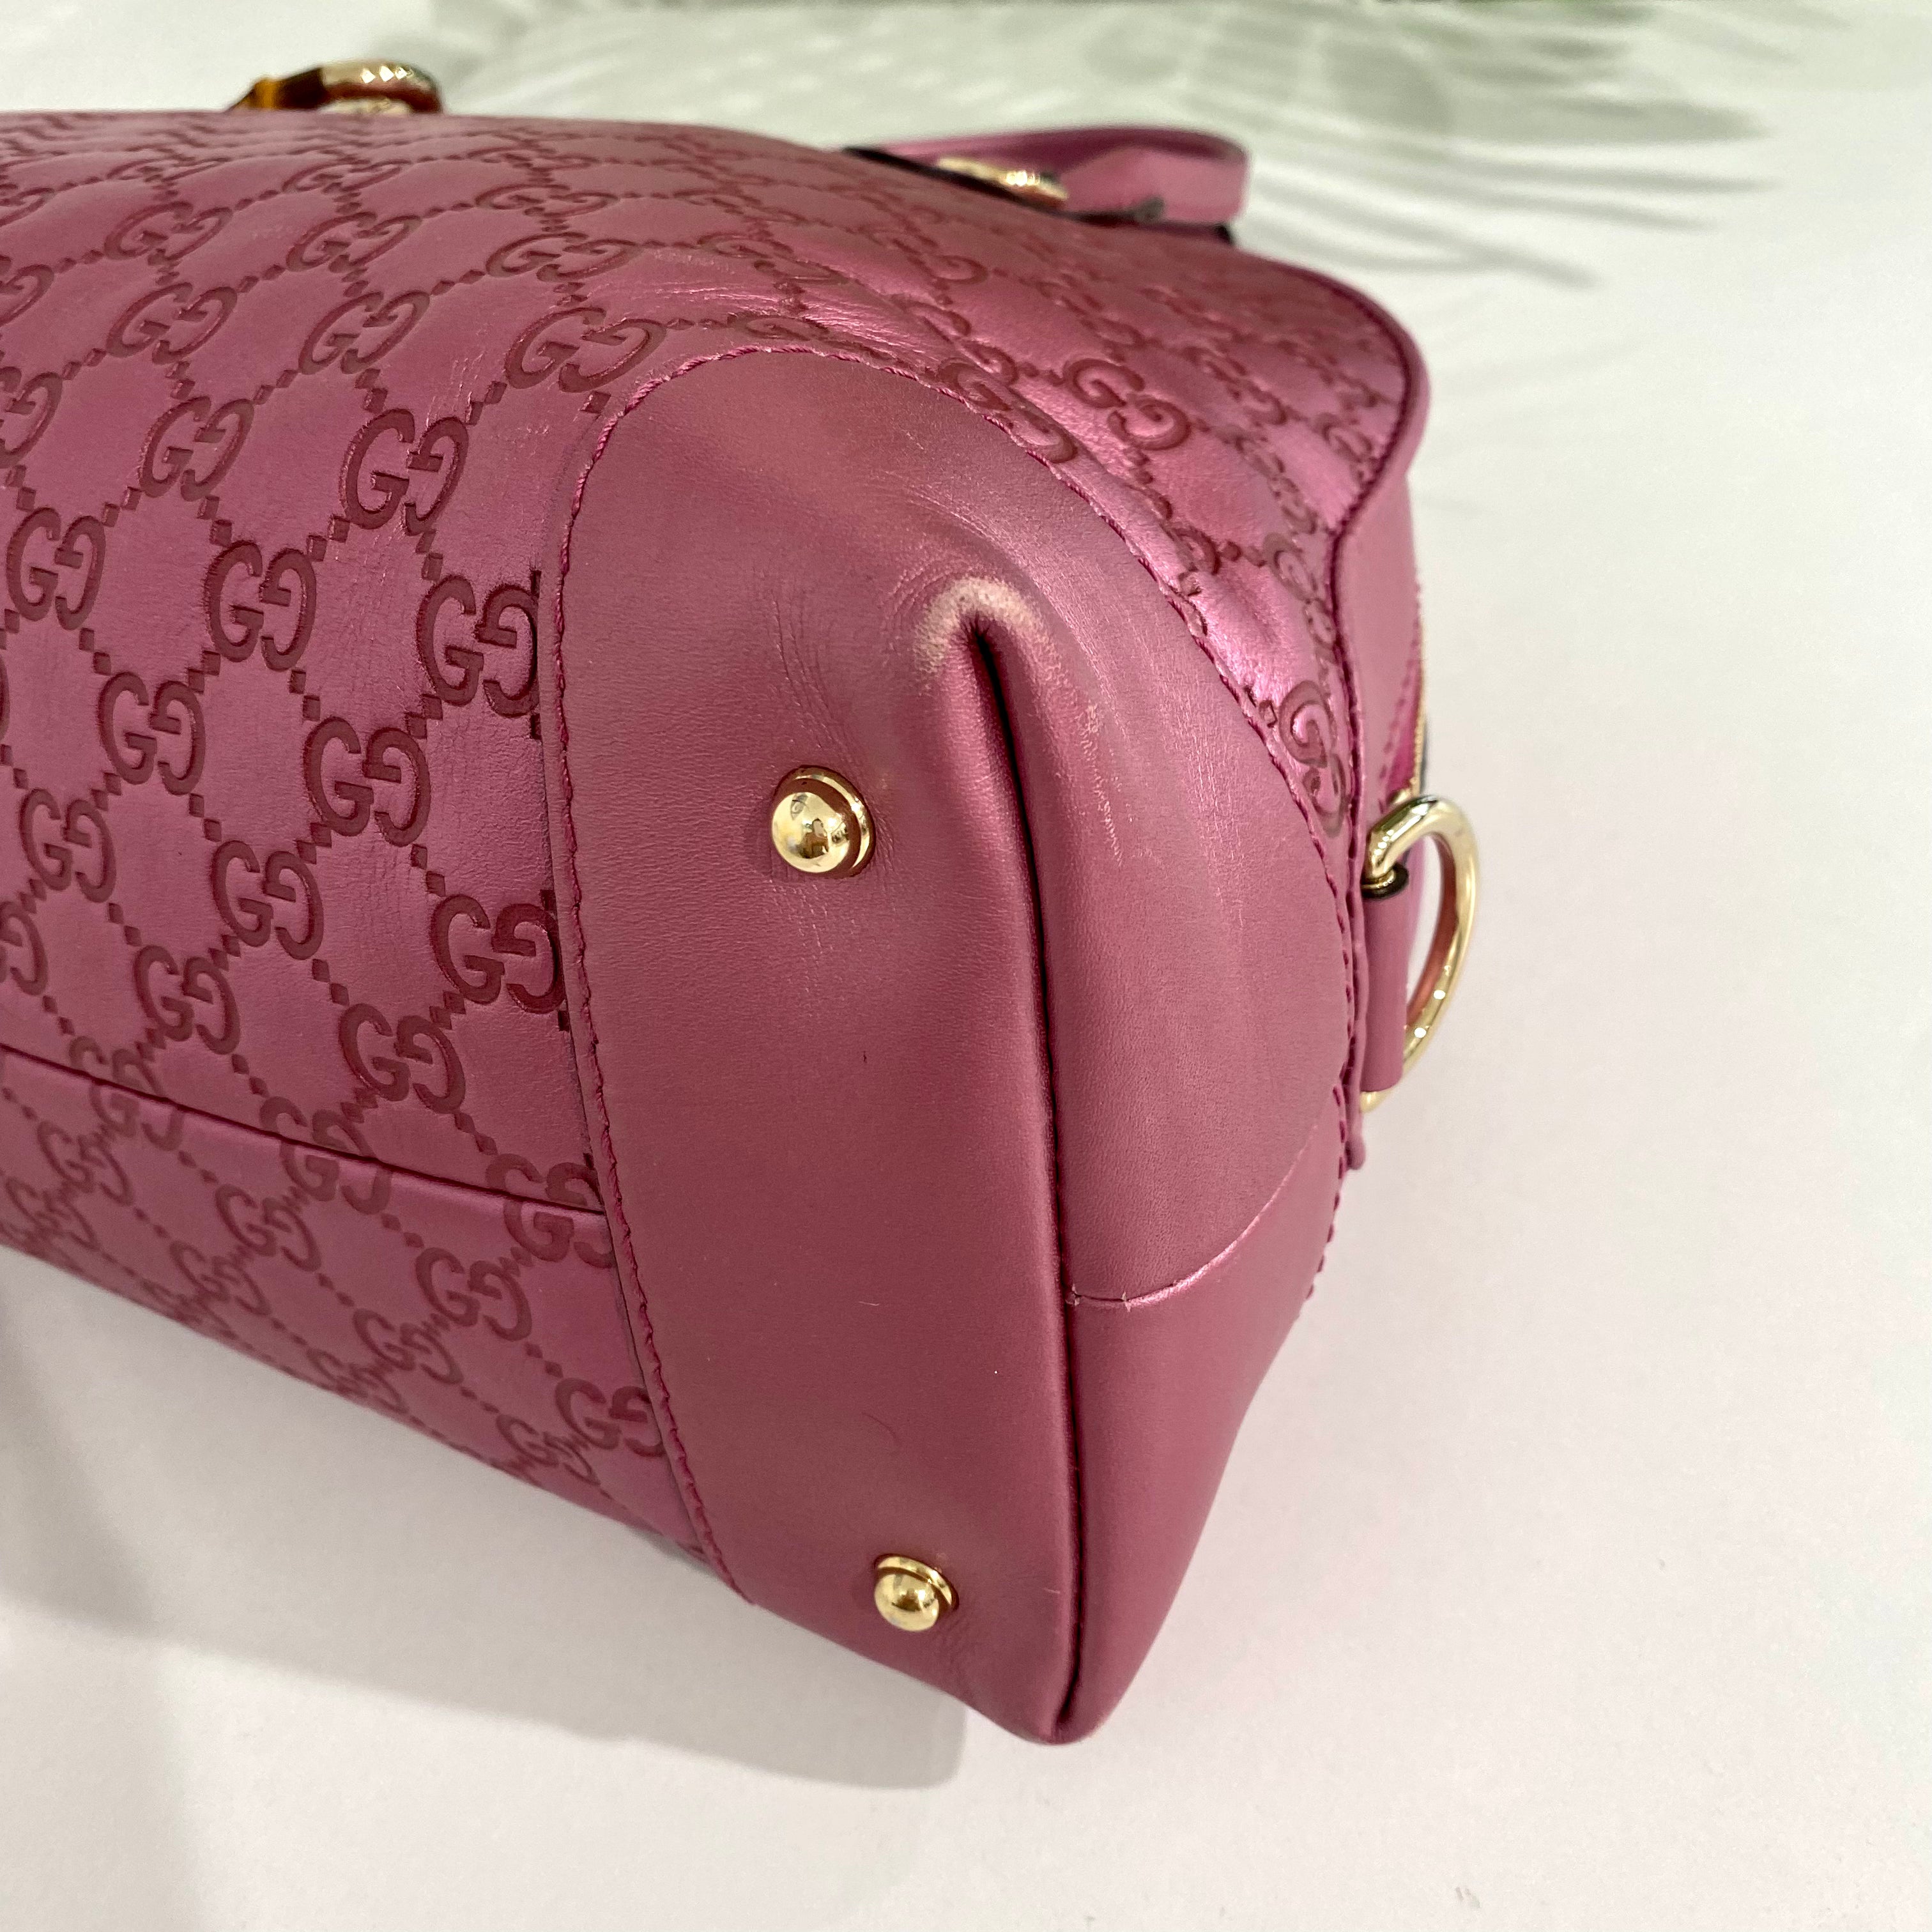 Gucci Signature Leather Tote in Pink